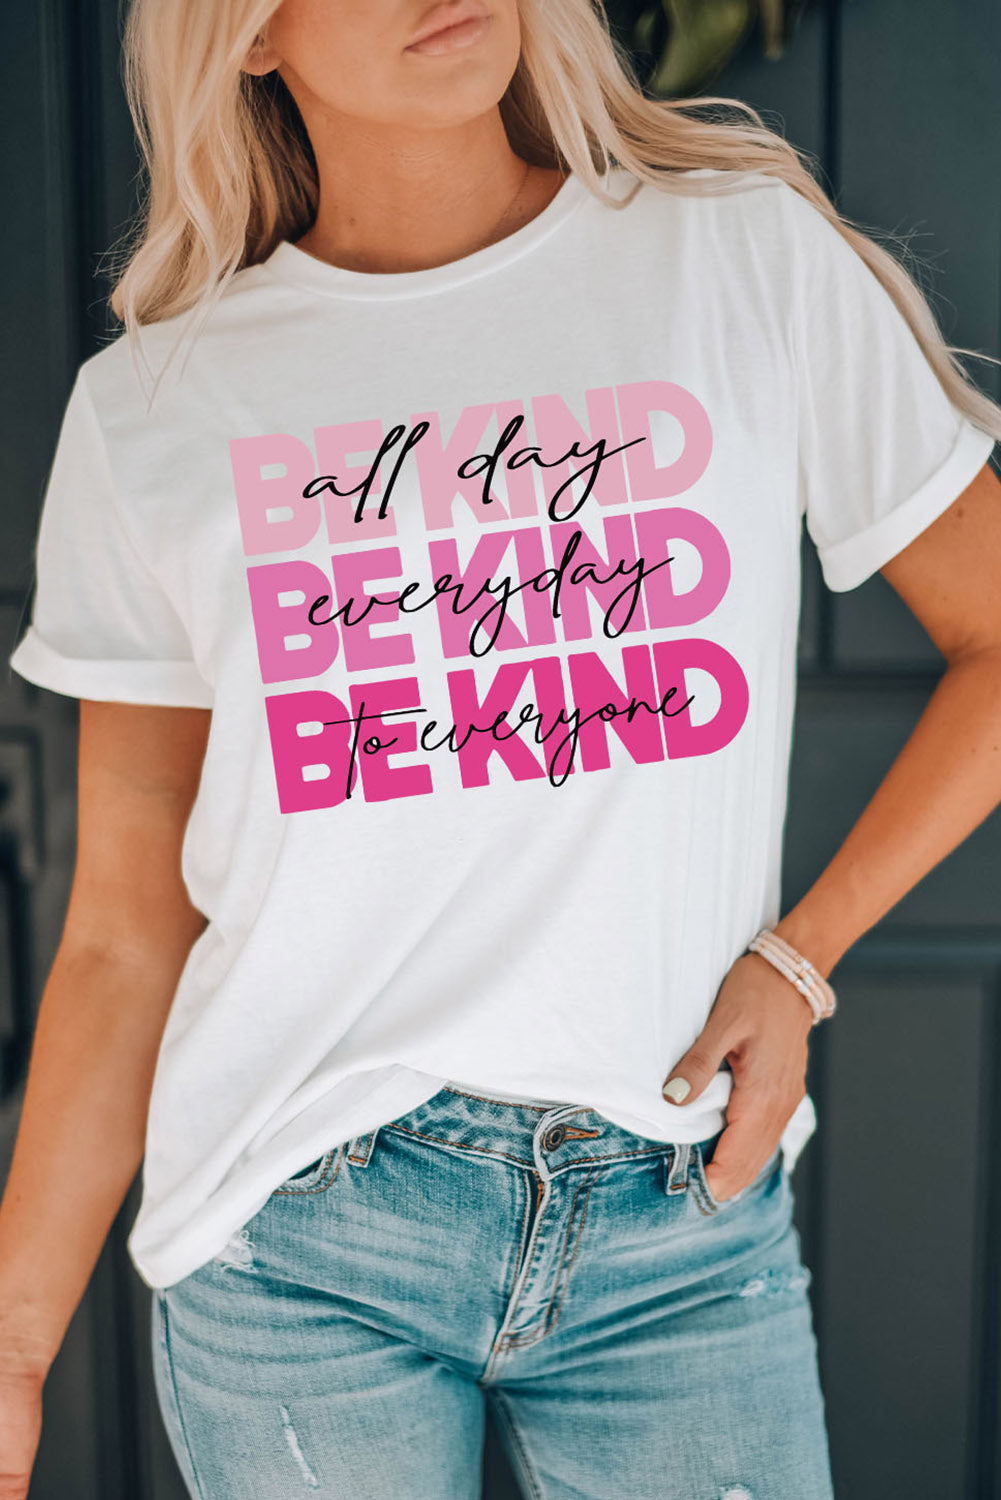 Be Kind All Day Everyday To Everyone Graphic Tee